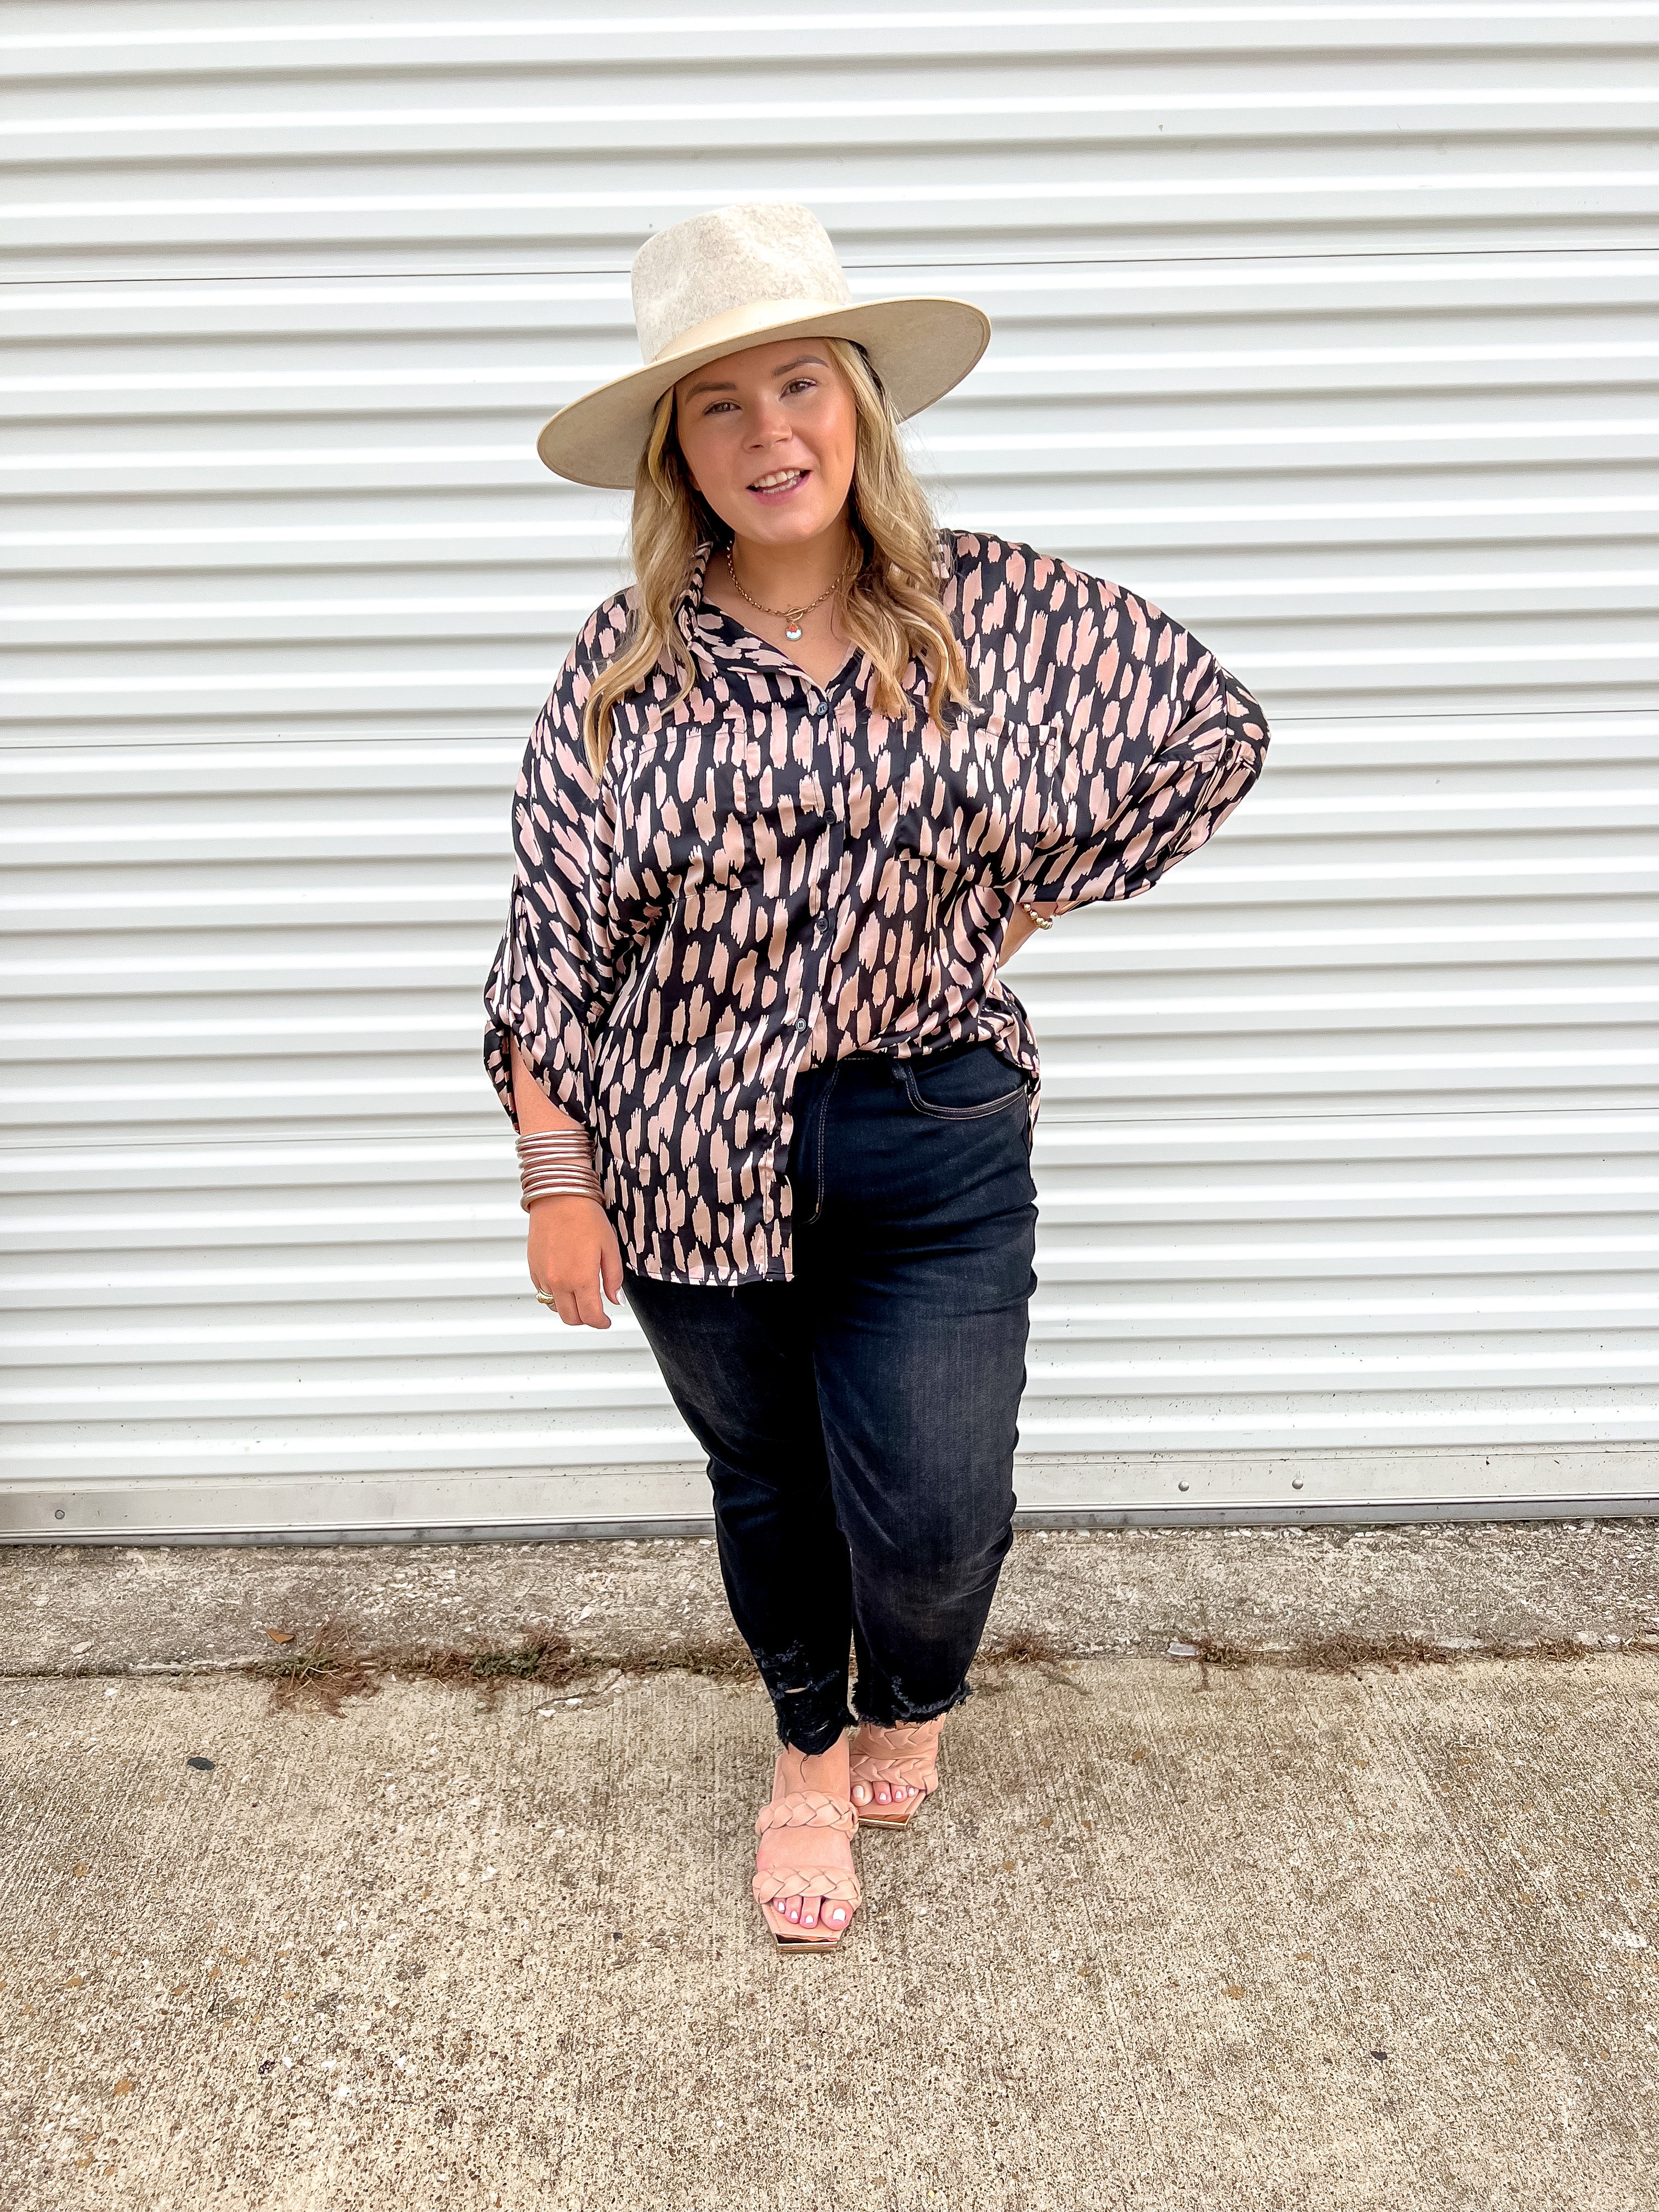 Going Places Button Up Satin Animal Print Top with Long Sleeves in Black - Giddy Up Glamour Boutique